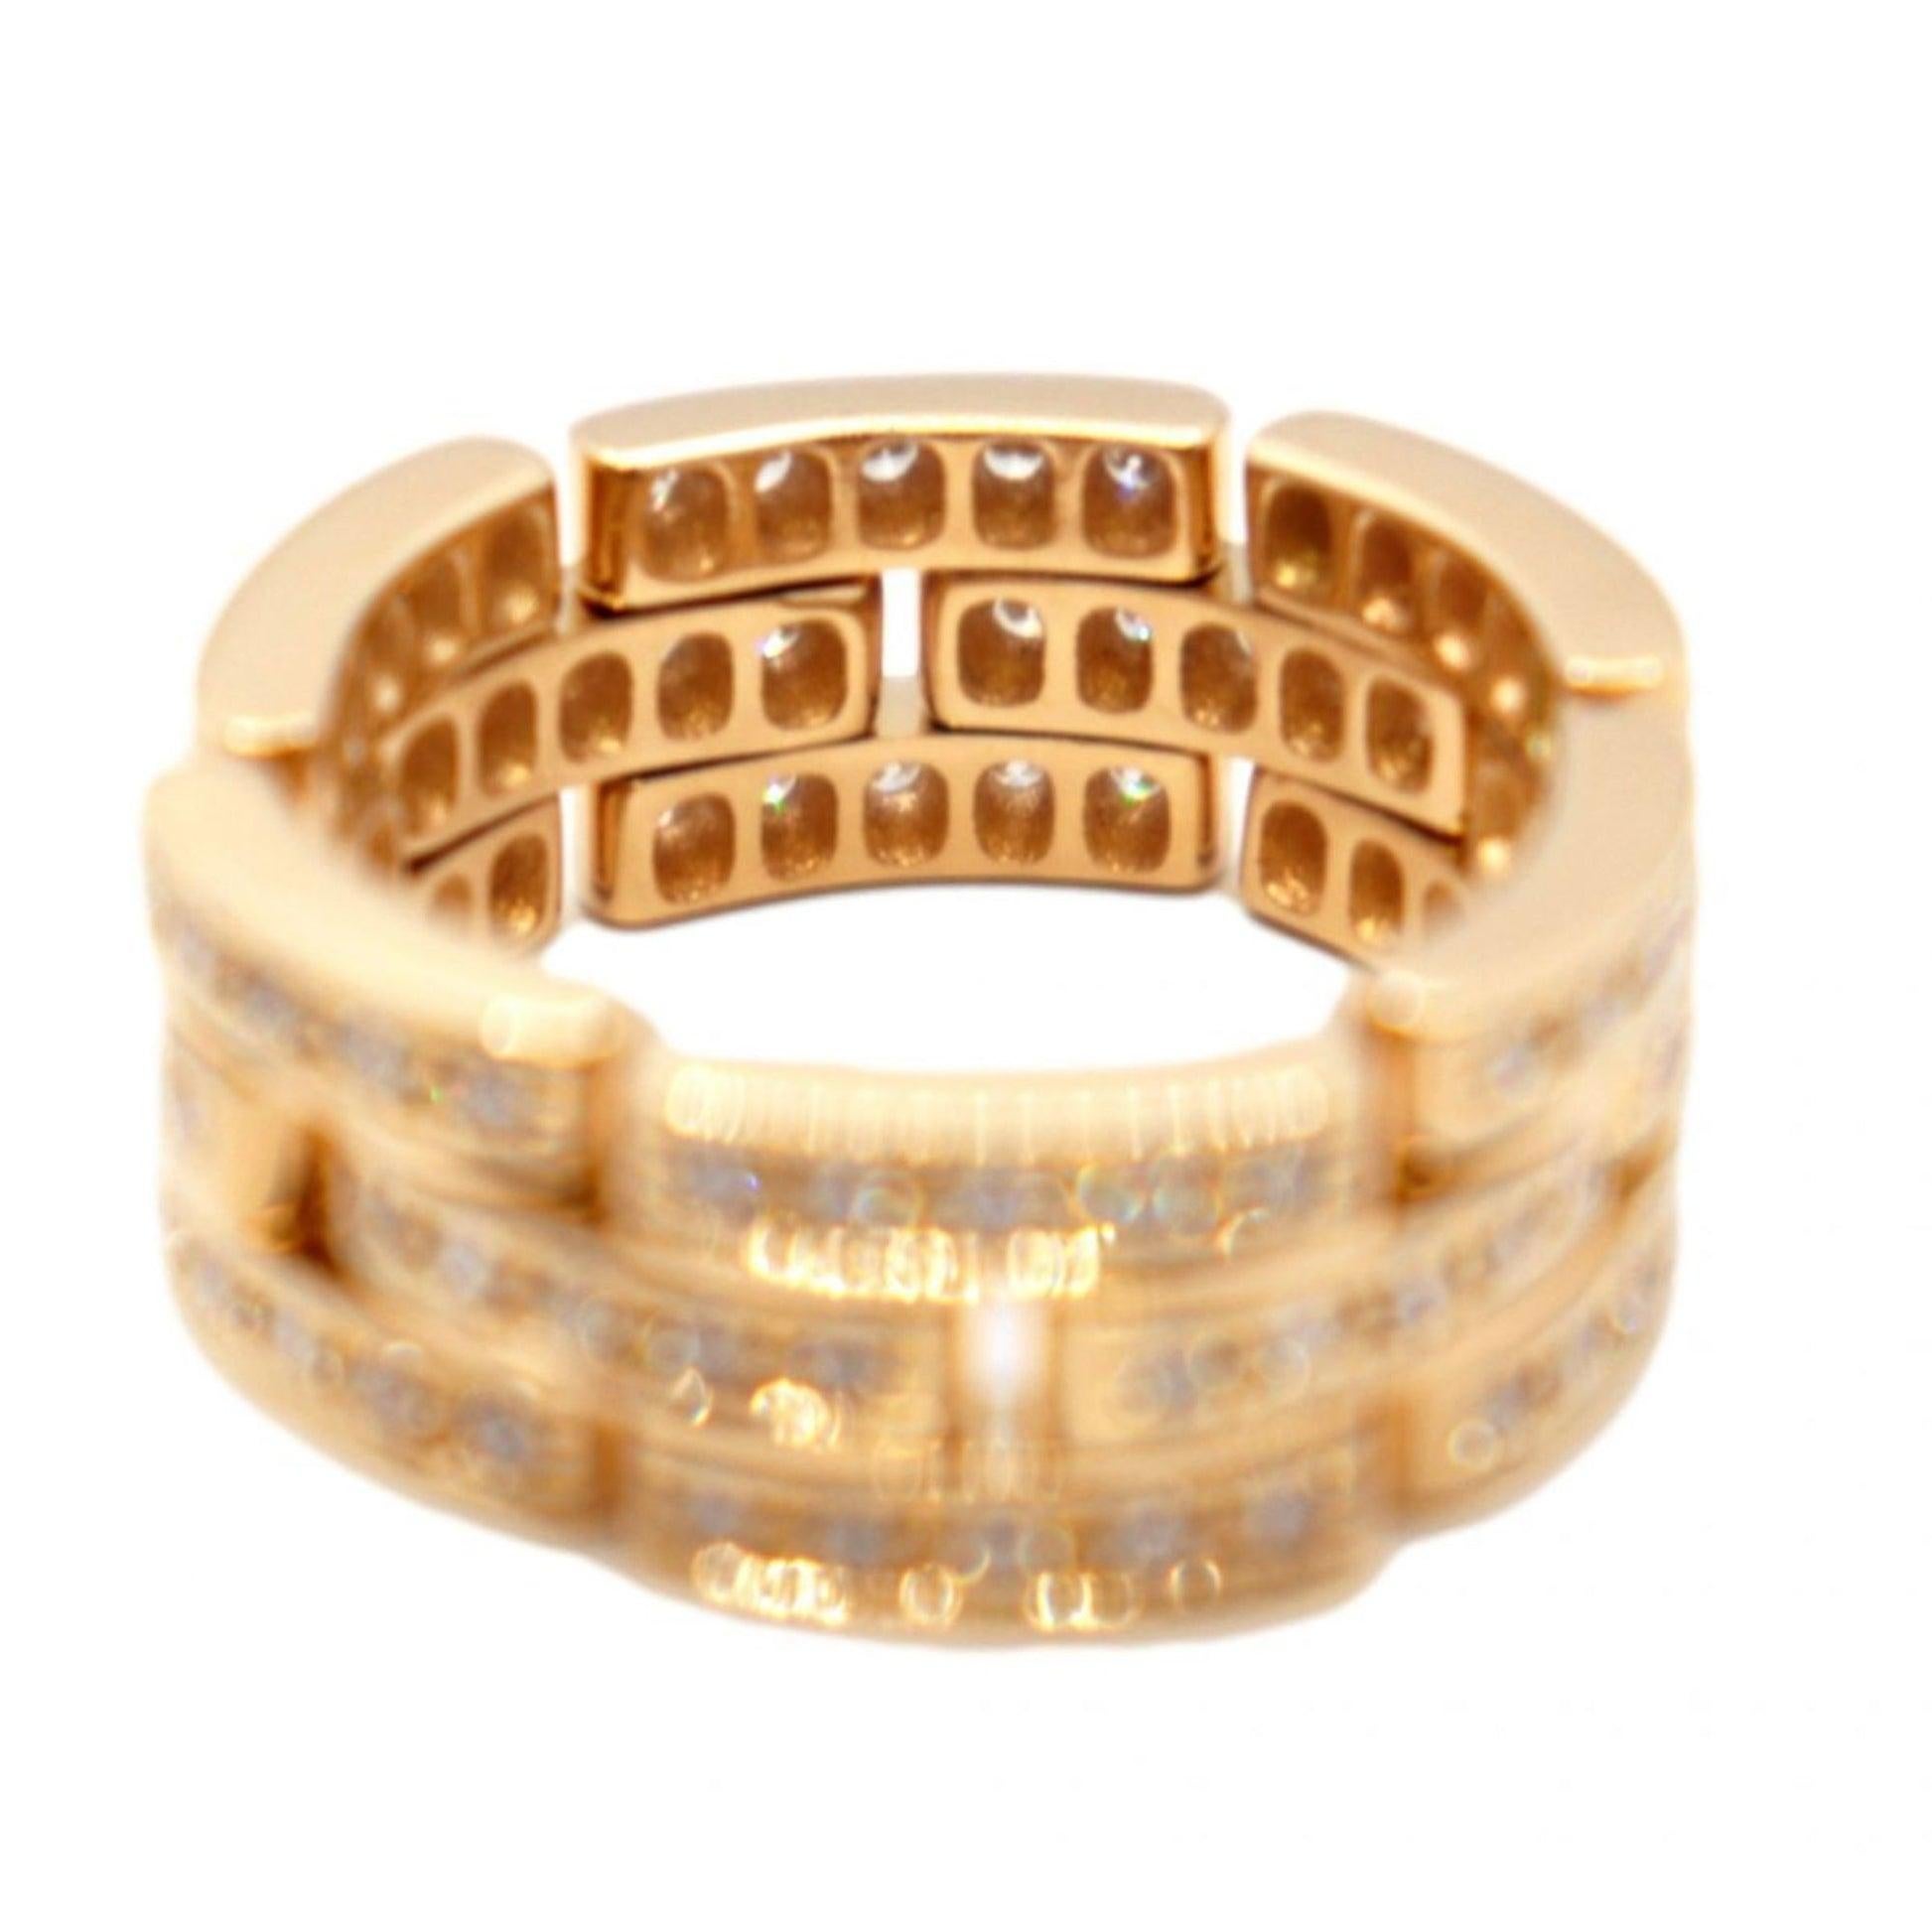 Women's or Men's Cartier Diamond Ring in 18K Yellow Gold For Sale